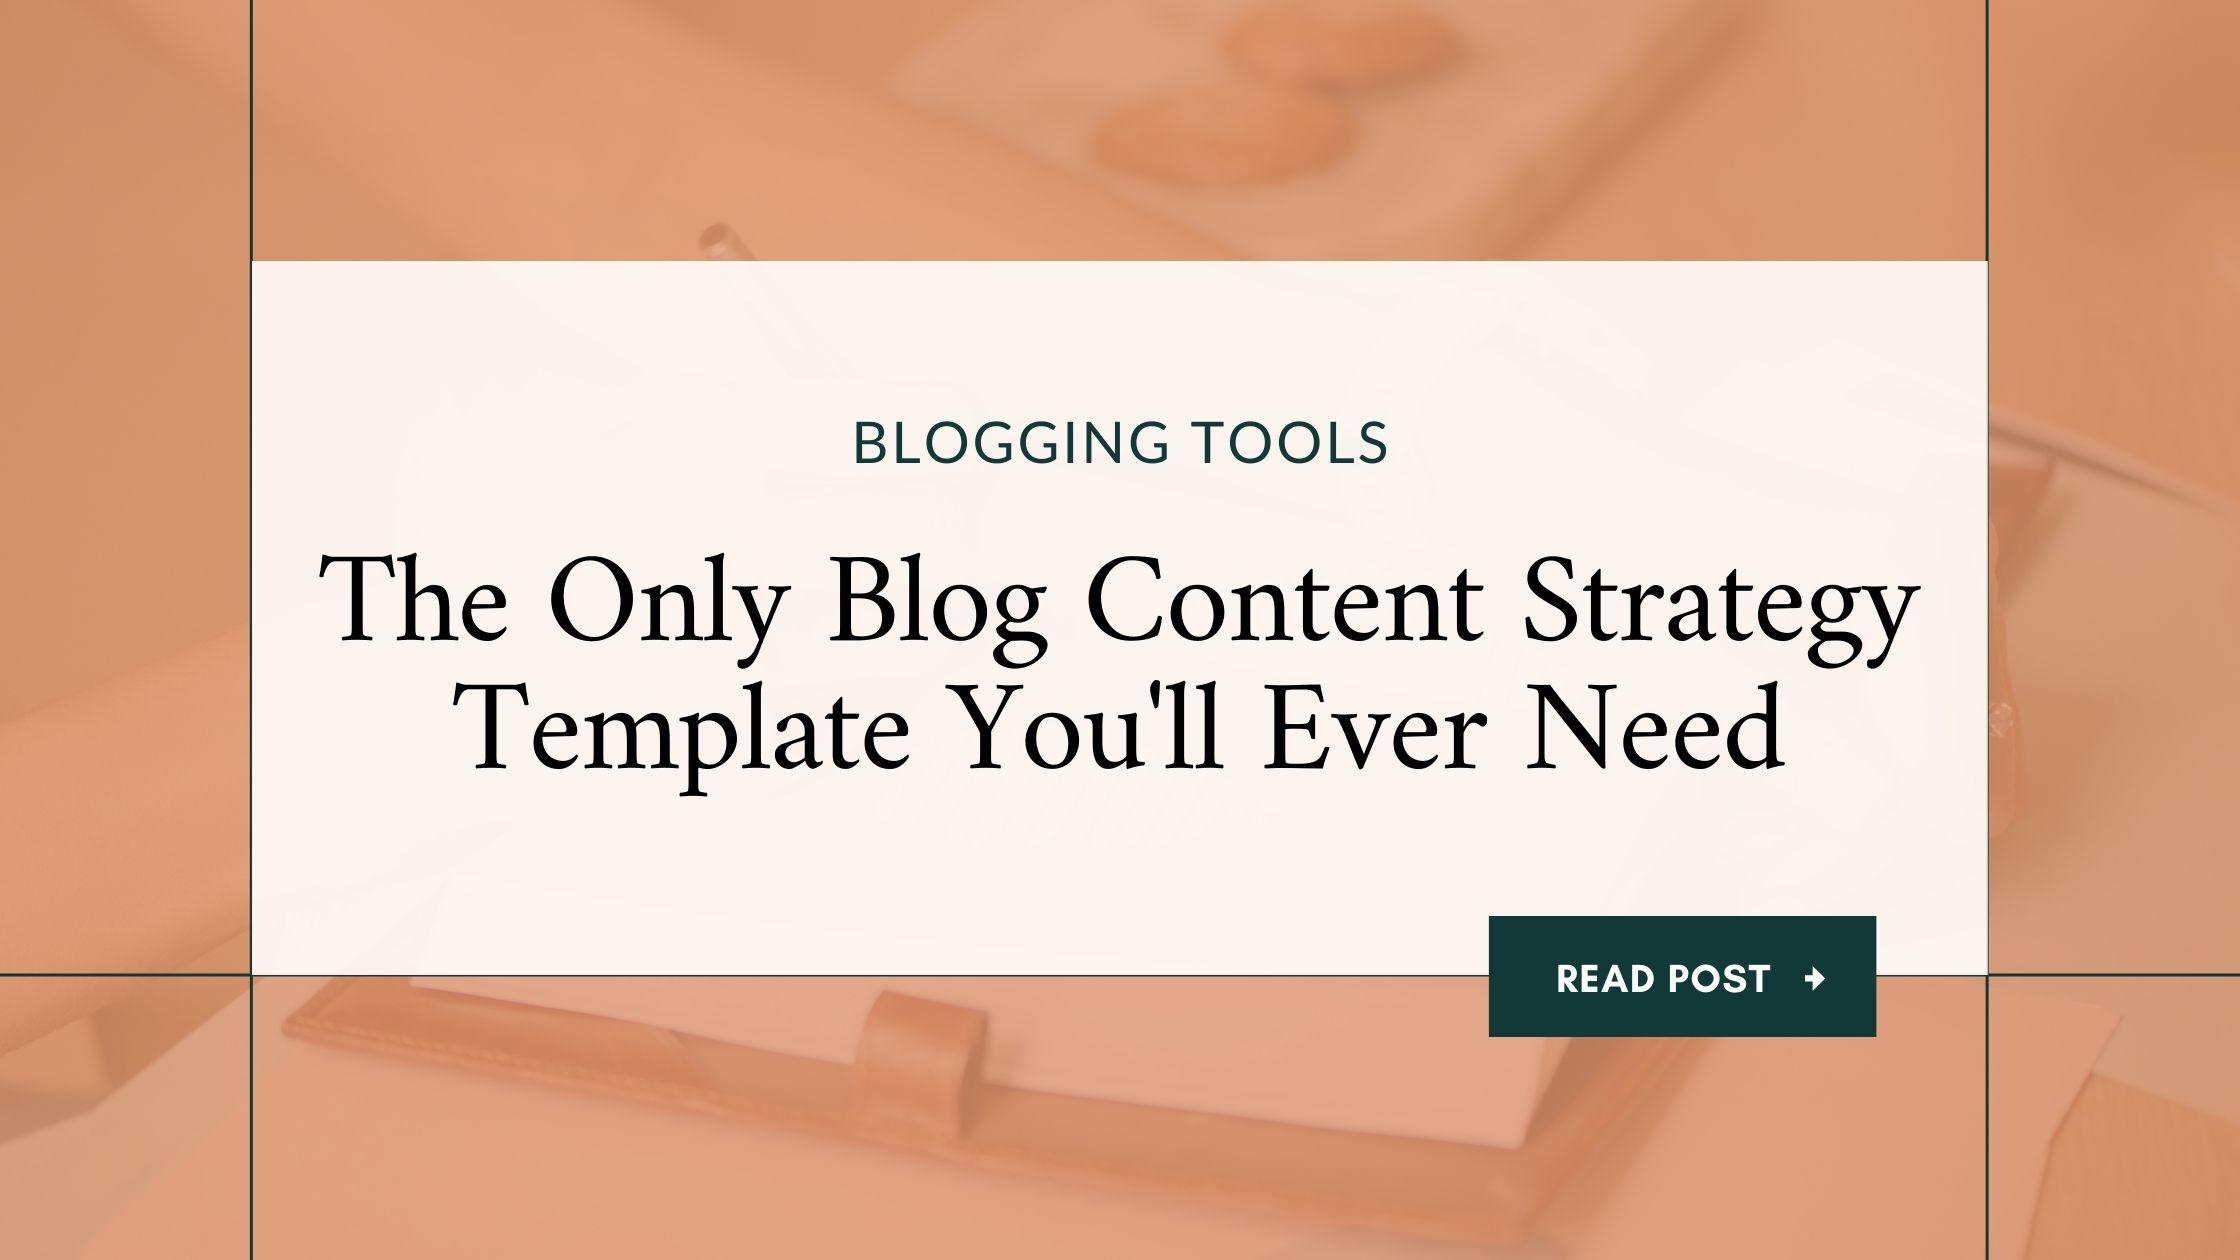 The Only Blog Content Strategy Template You’ll Ever Need